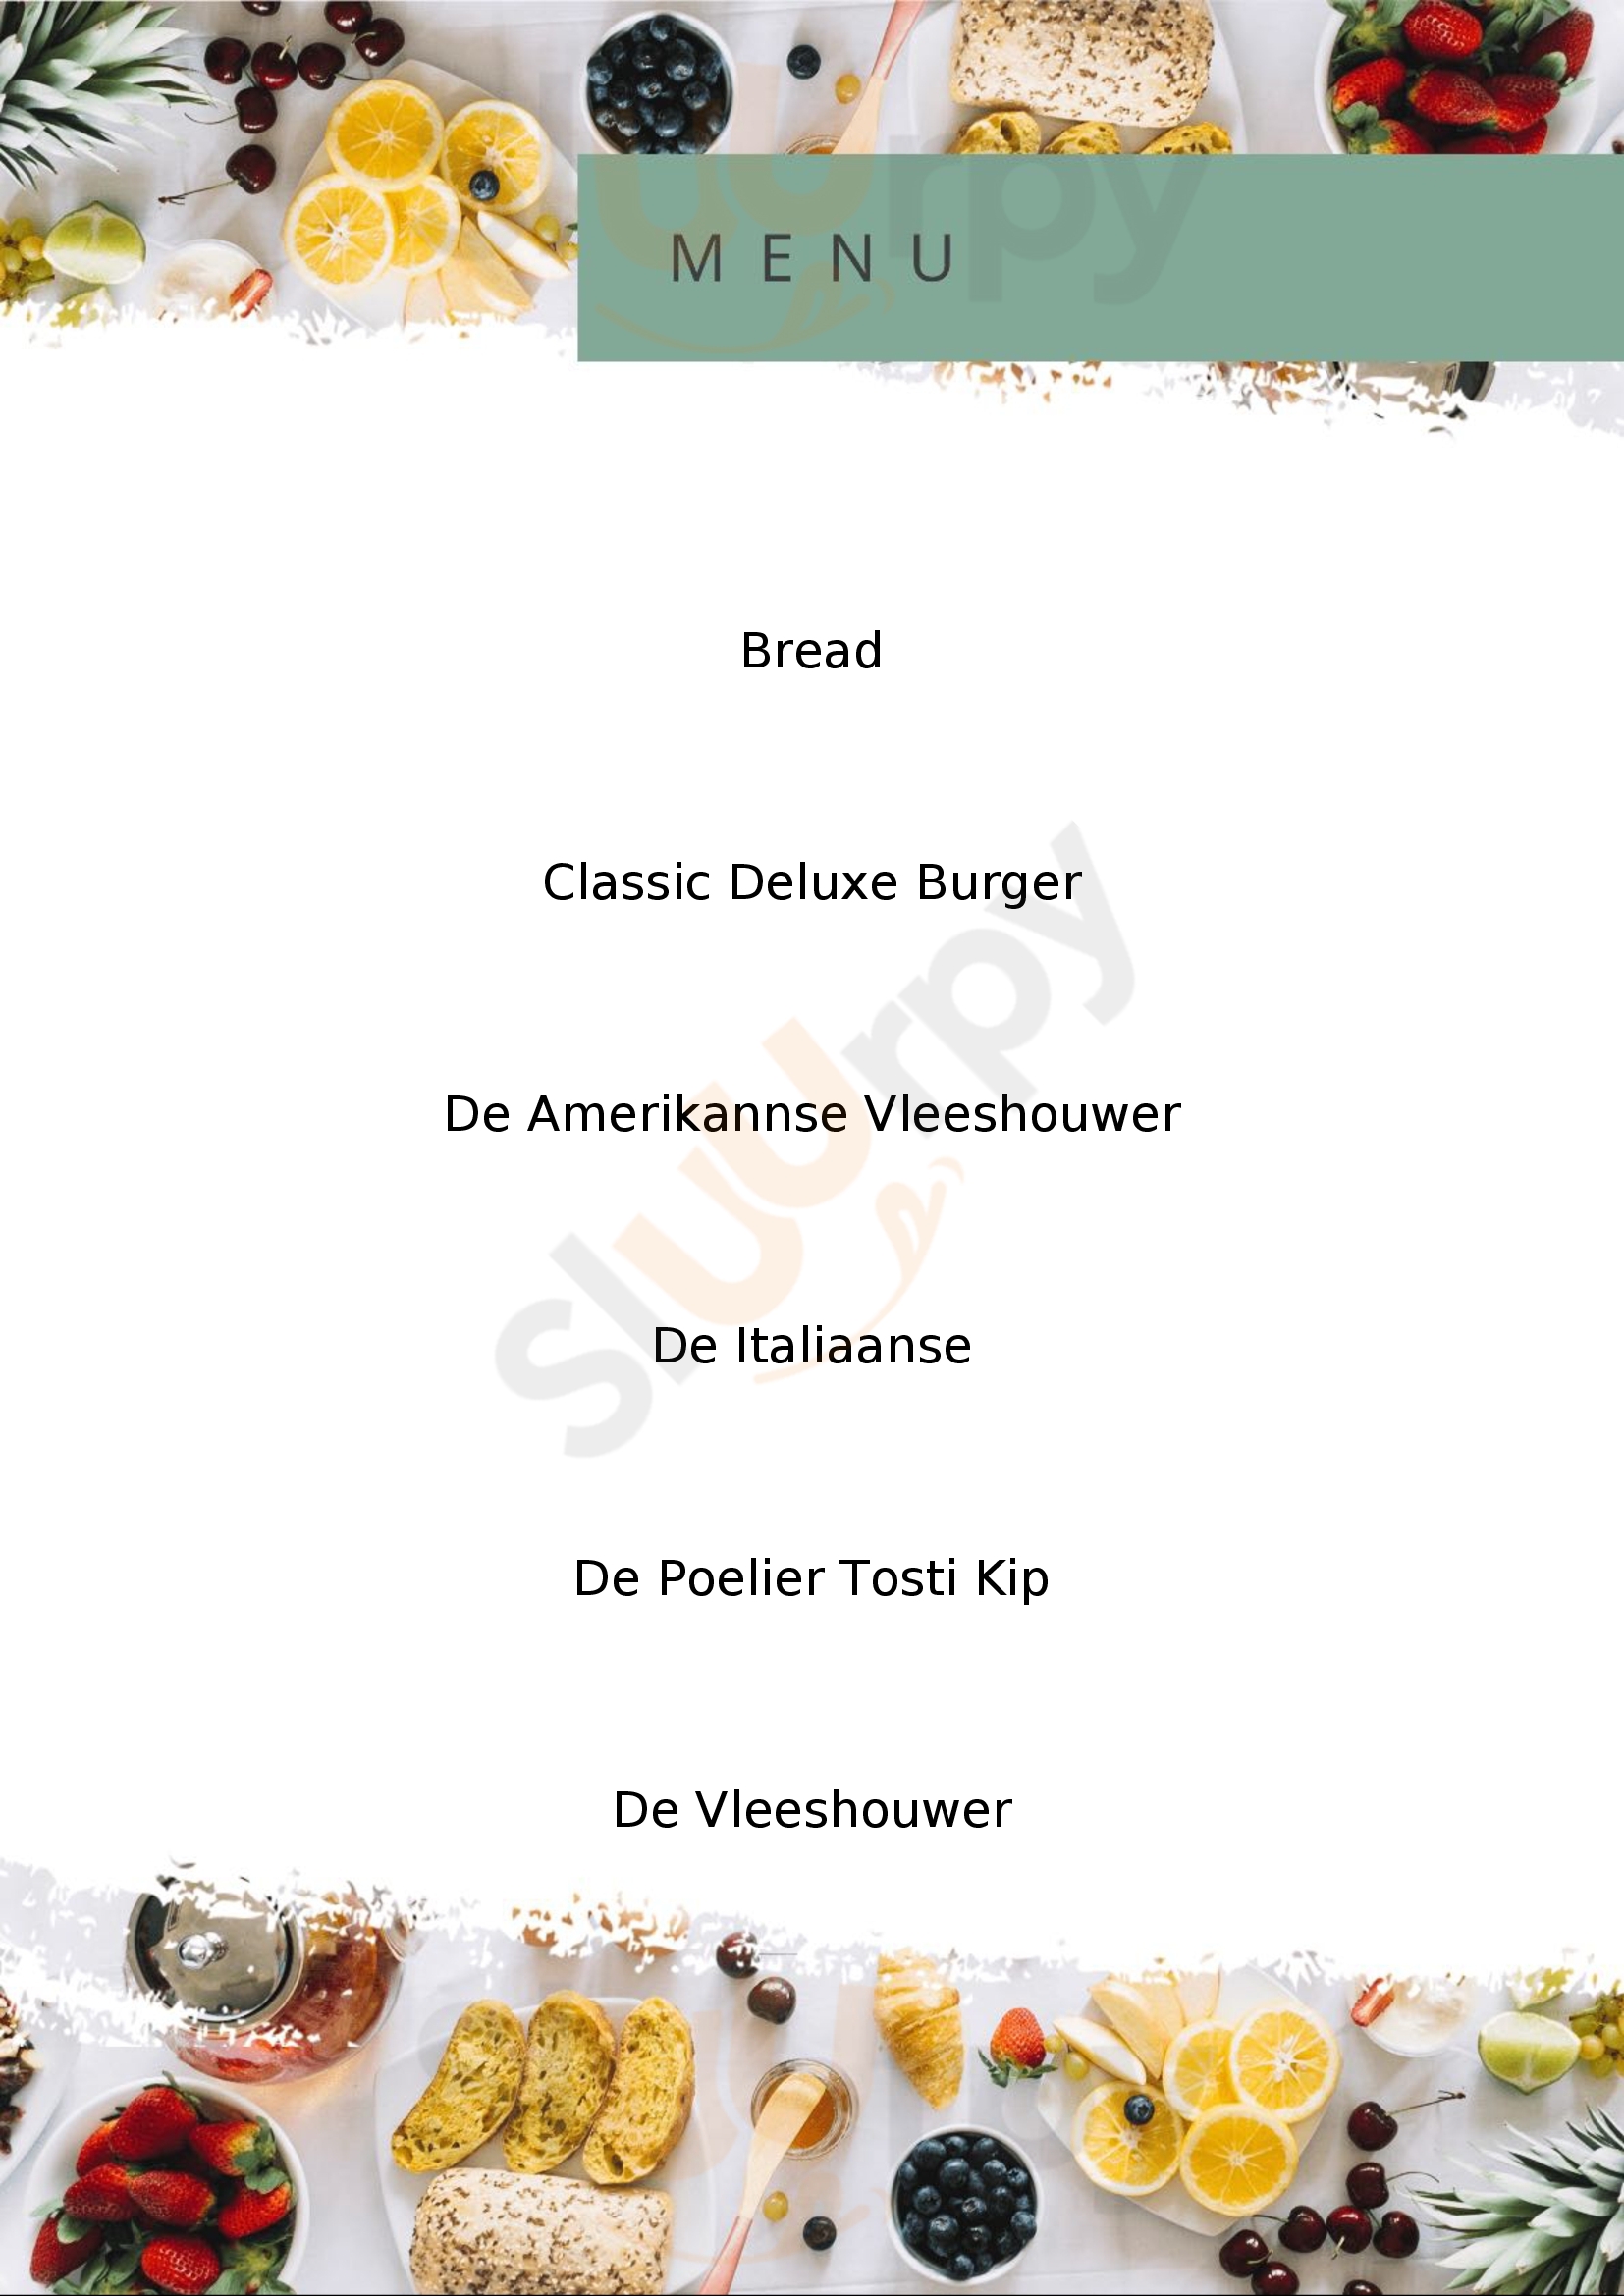 Toasted & Roasted - Tosti's & Burgers Eindhoven Menu - 1